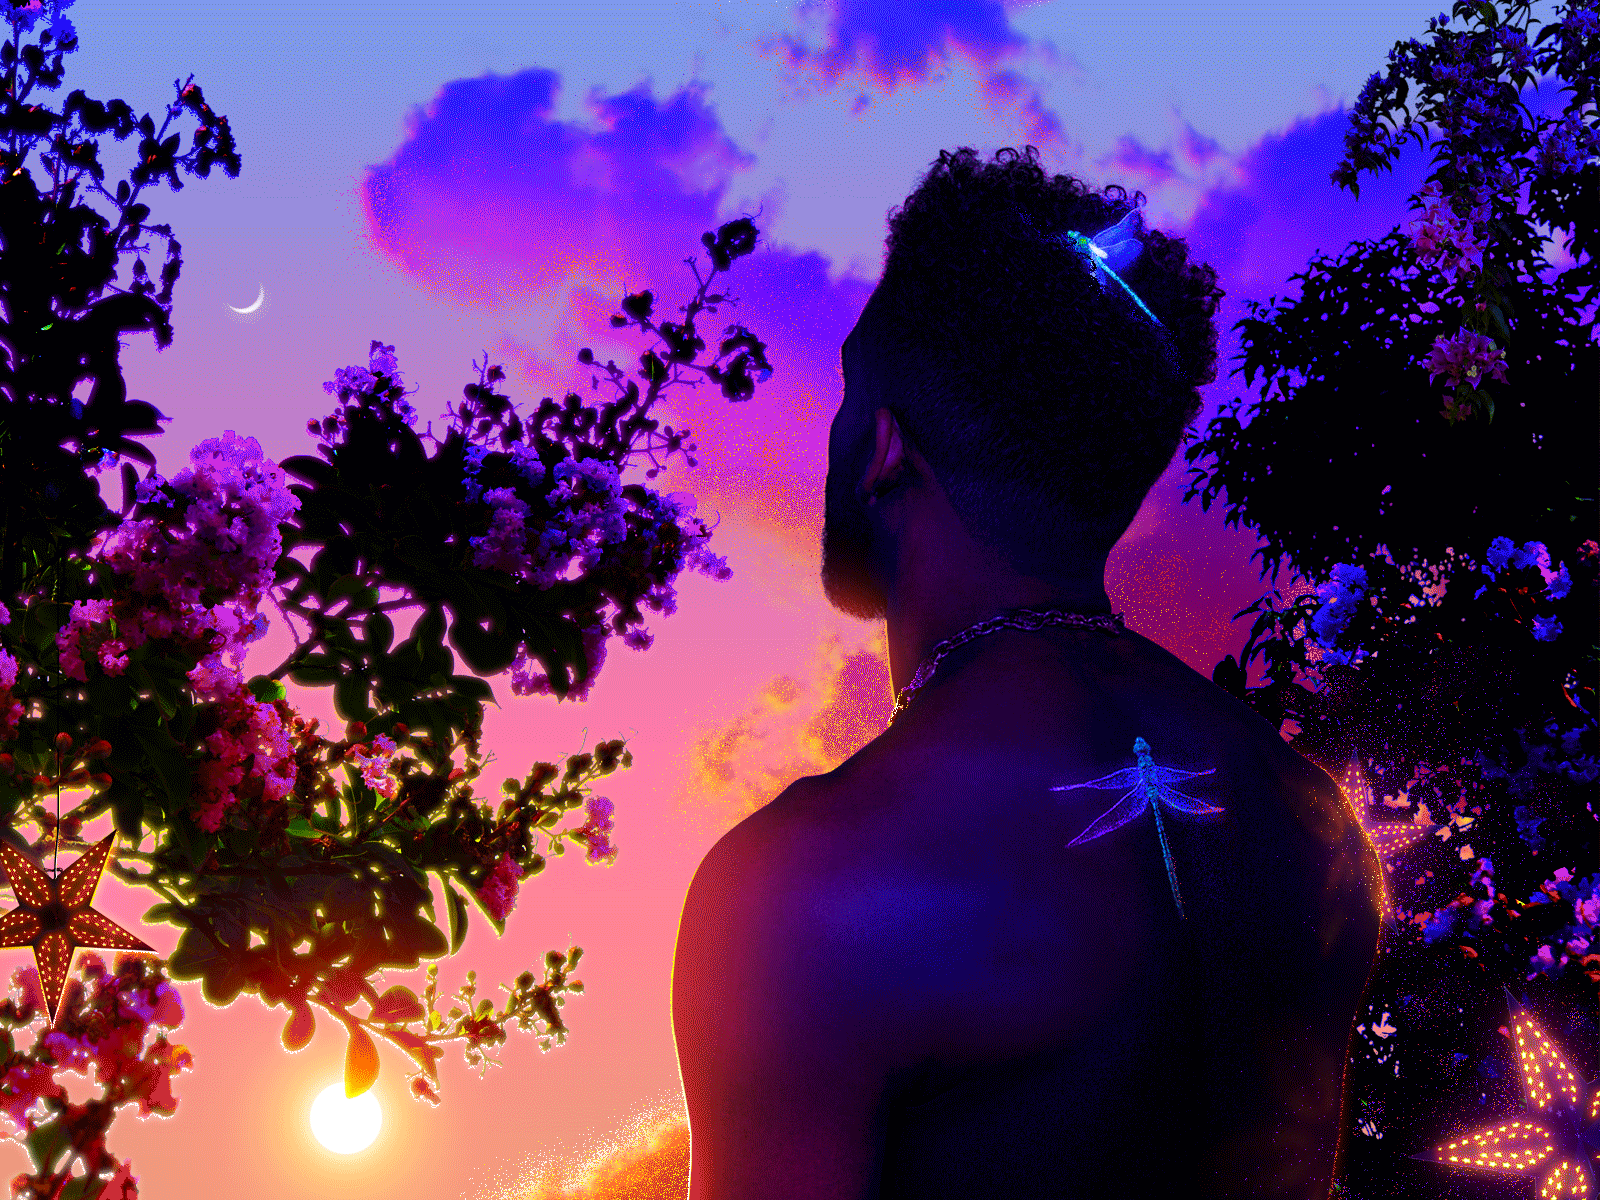 🔭🌒✧˖° aesthetics animation botanical boy dragonfly fairy lights floral flowers foliage garden gay gif gradient gradients illustration insect mood queer sunset vibes